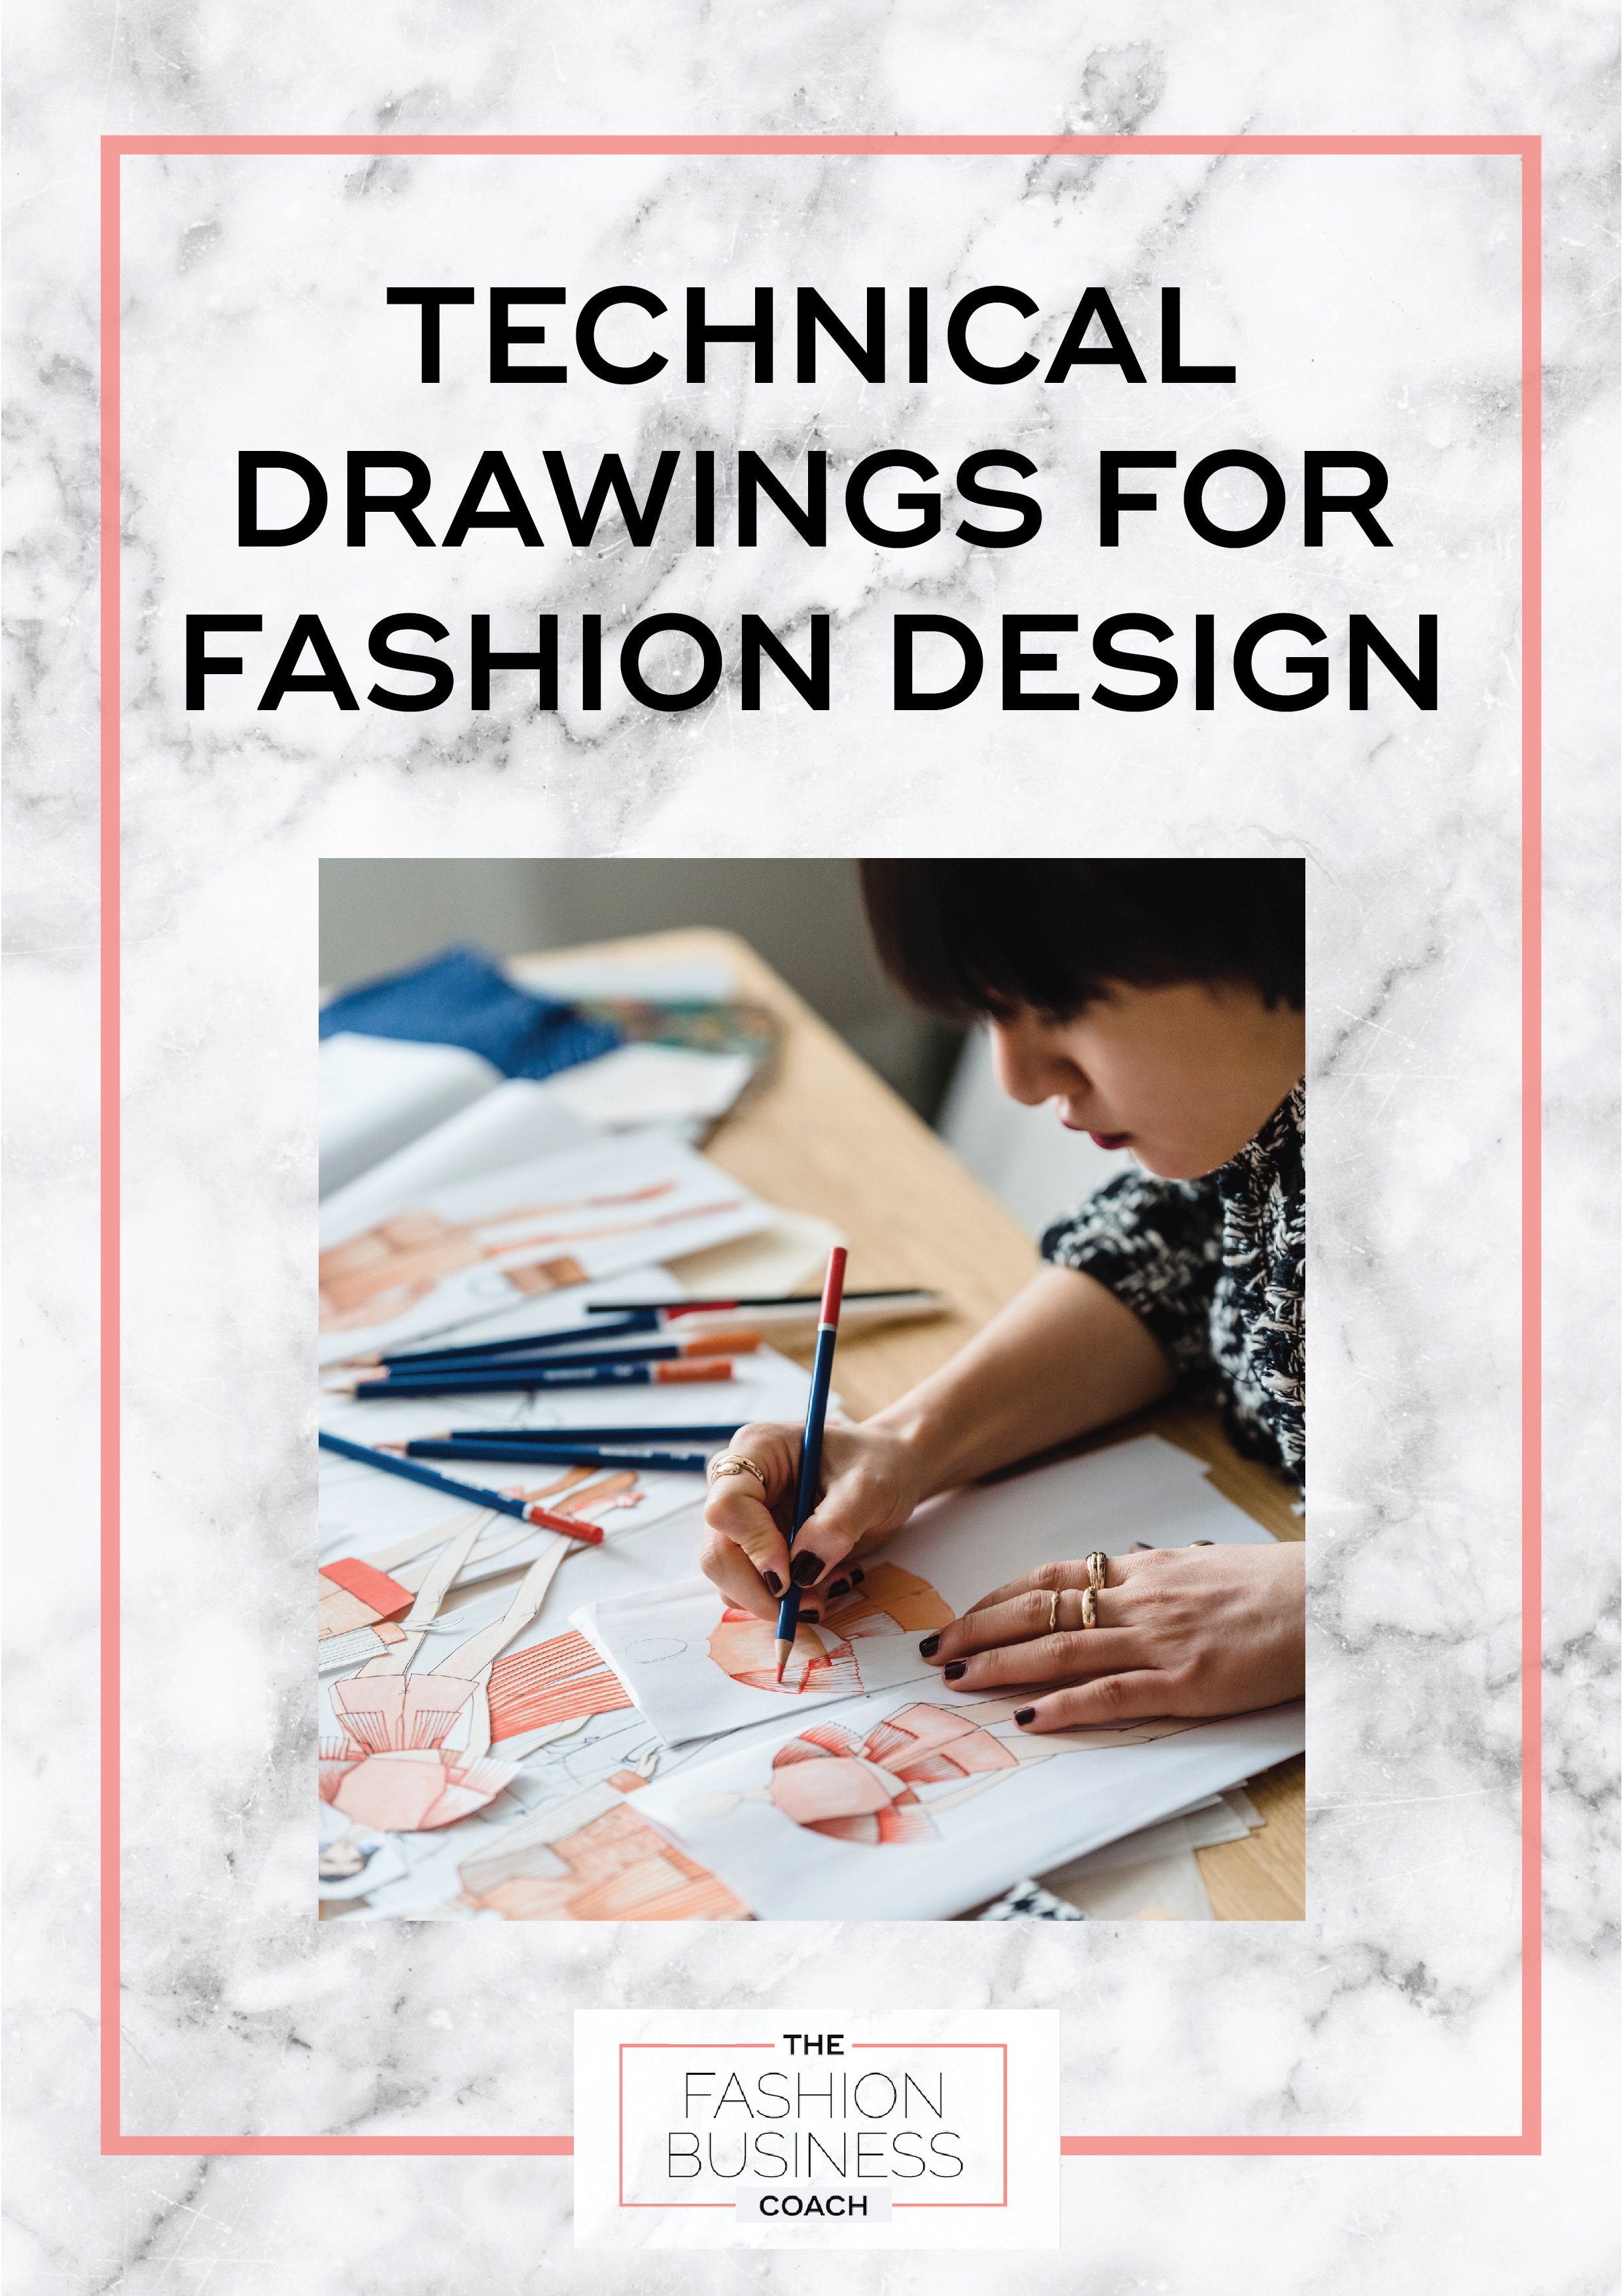 Technical drawings for fashion design 2.jpg